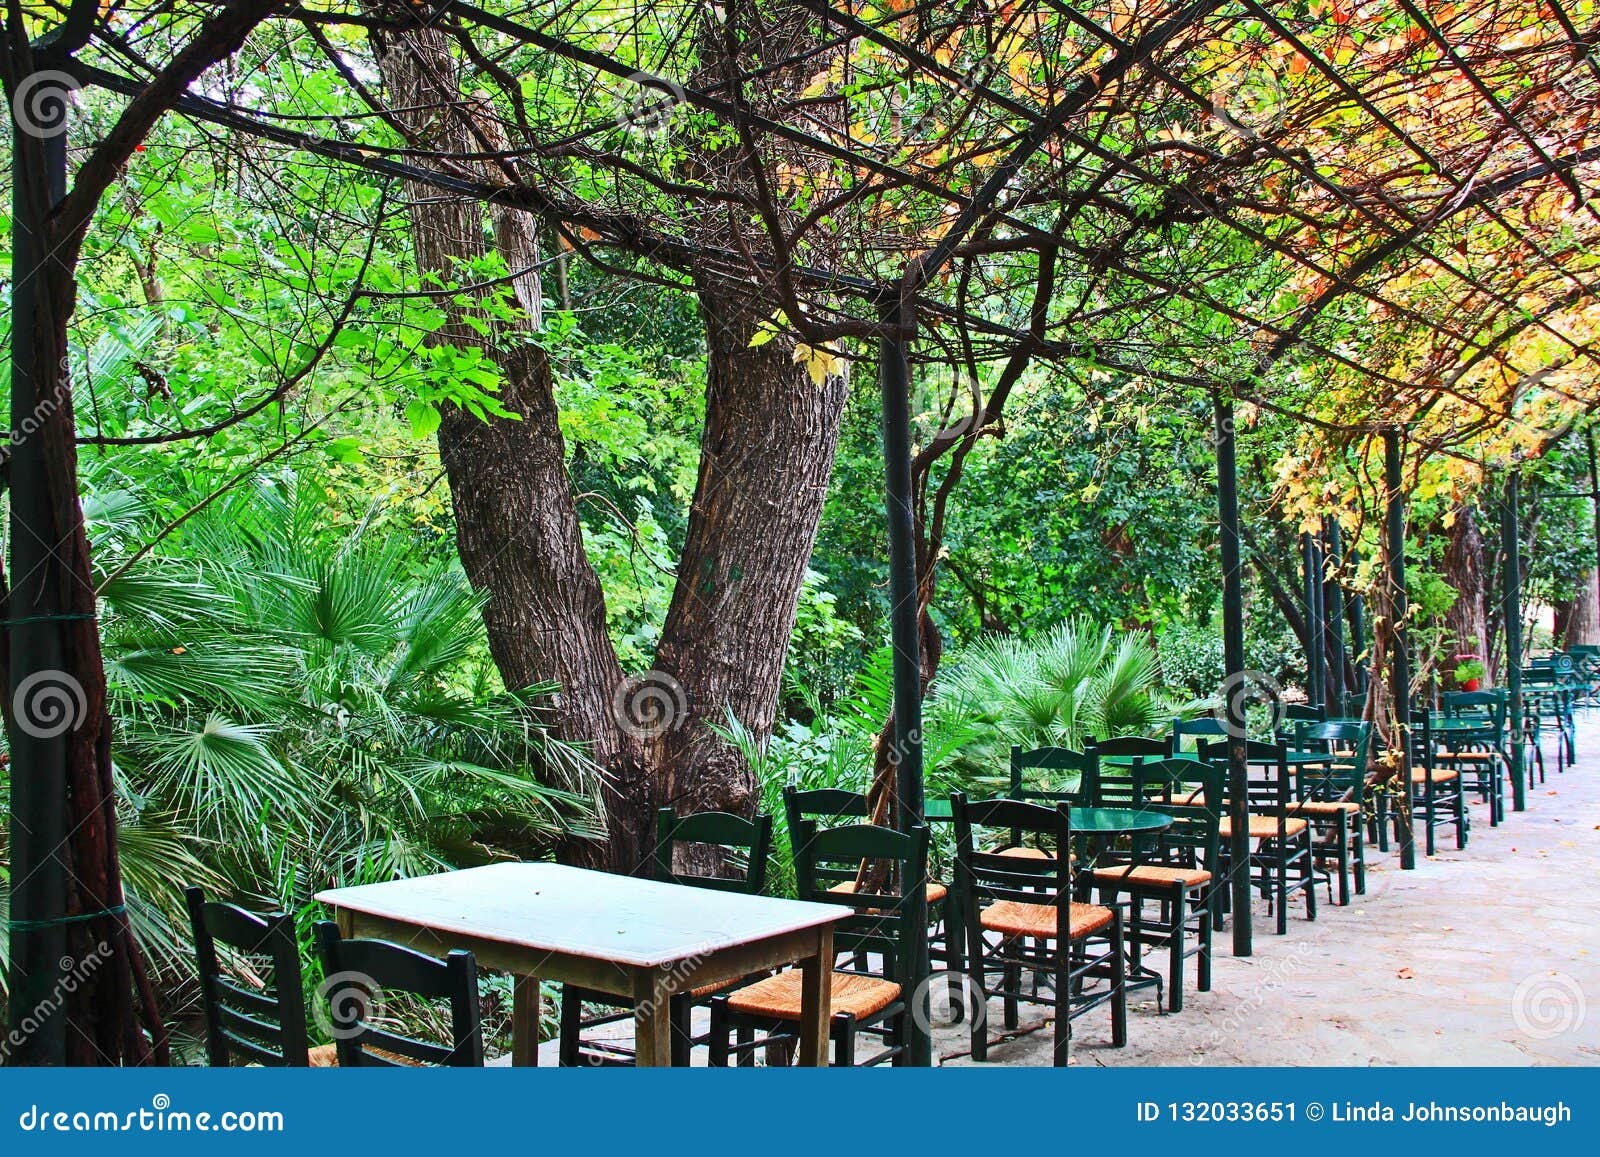 Outdoor Cafe In The National Garden In Athens Greece Stock Image